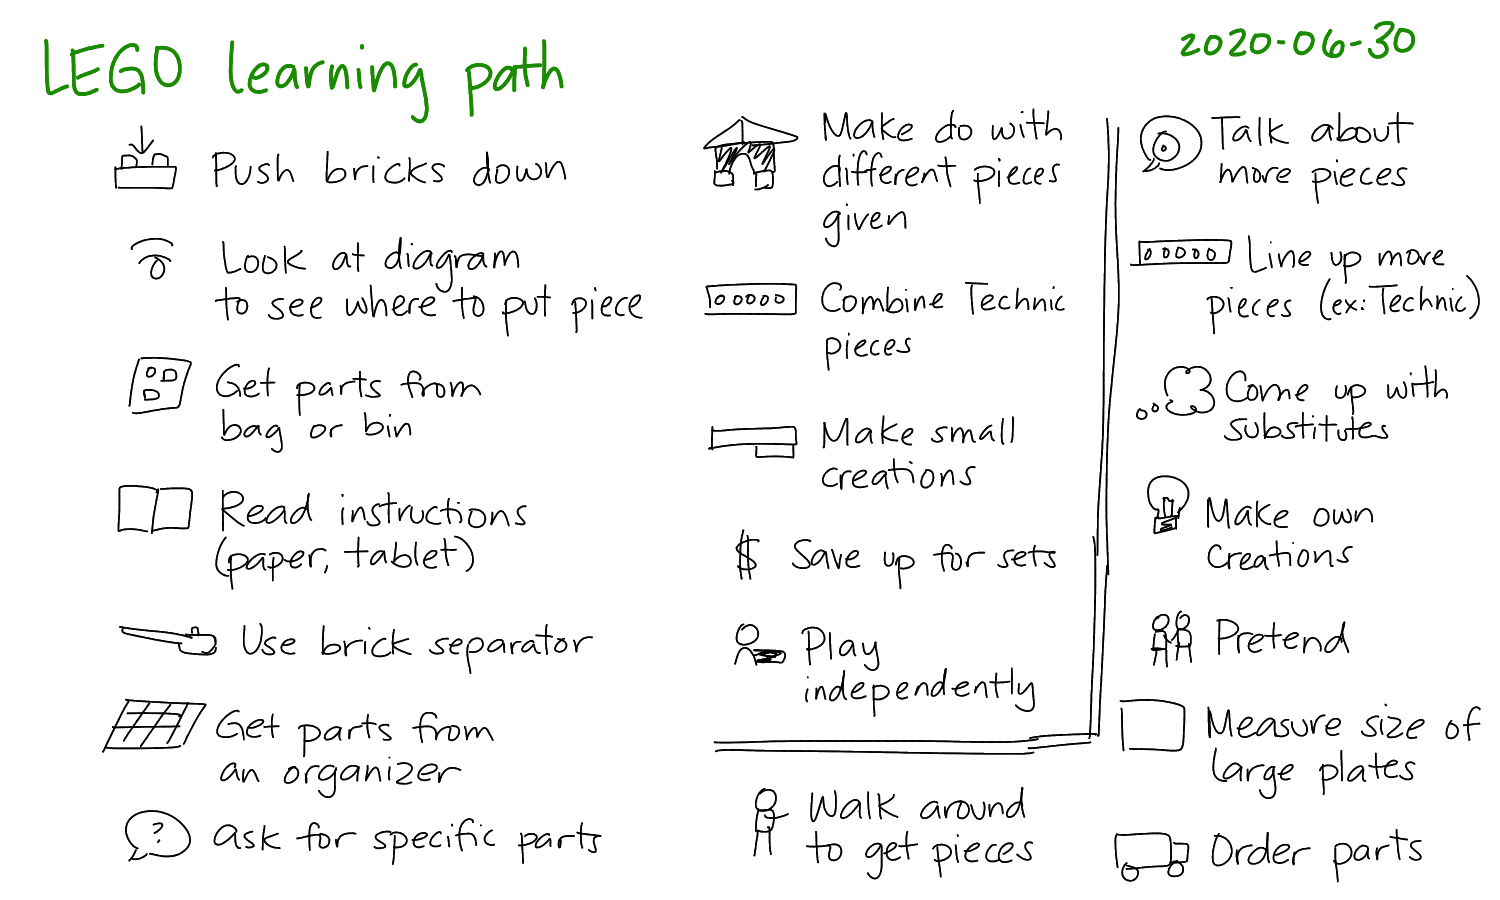 2020-06-30 LEGO learning path #parenting #lego #skills.png